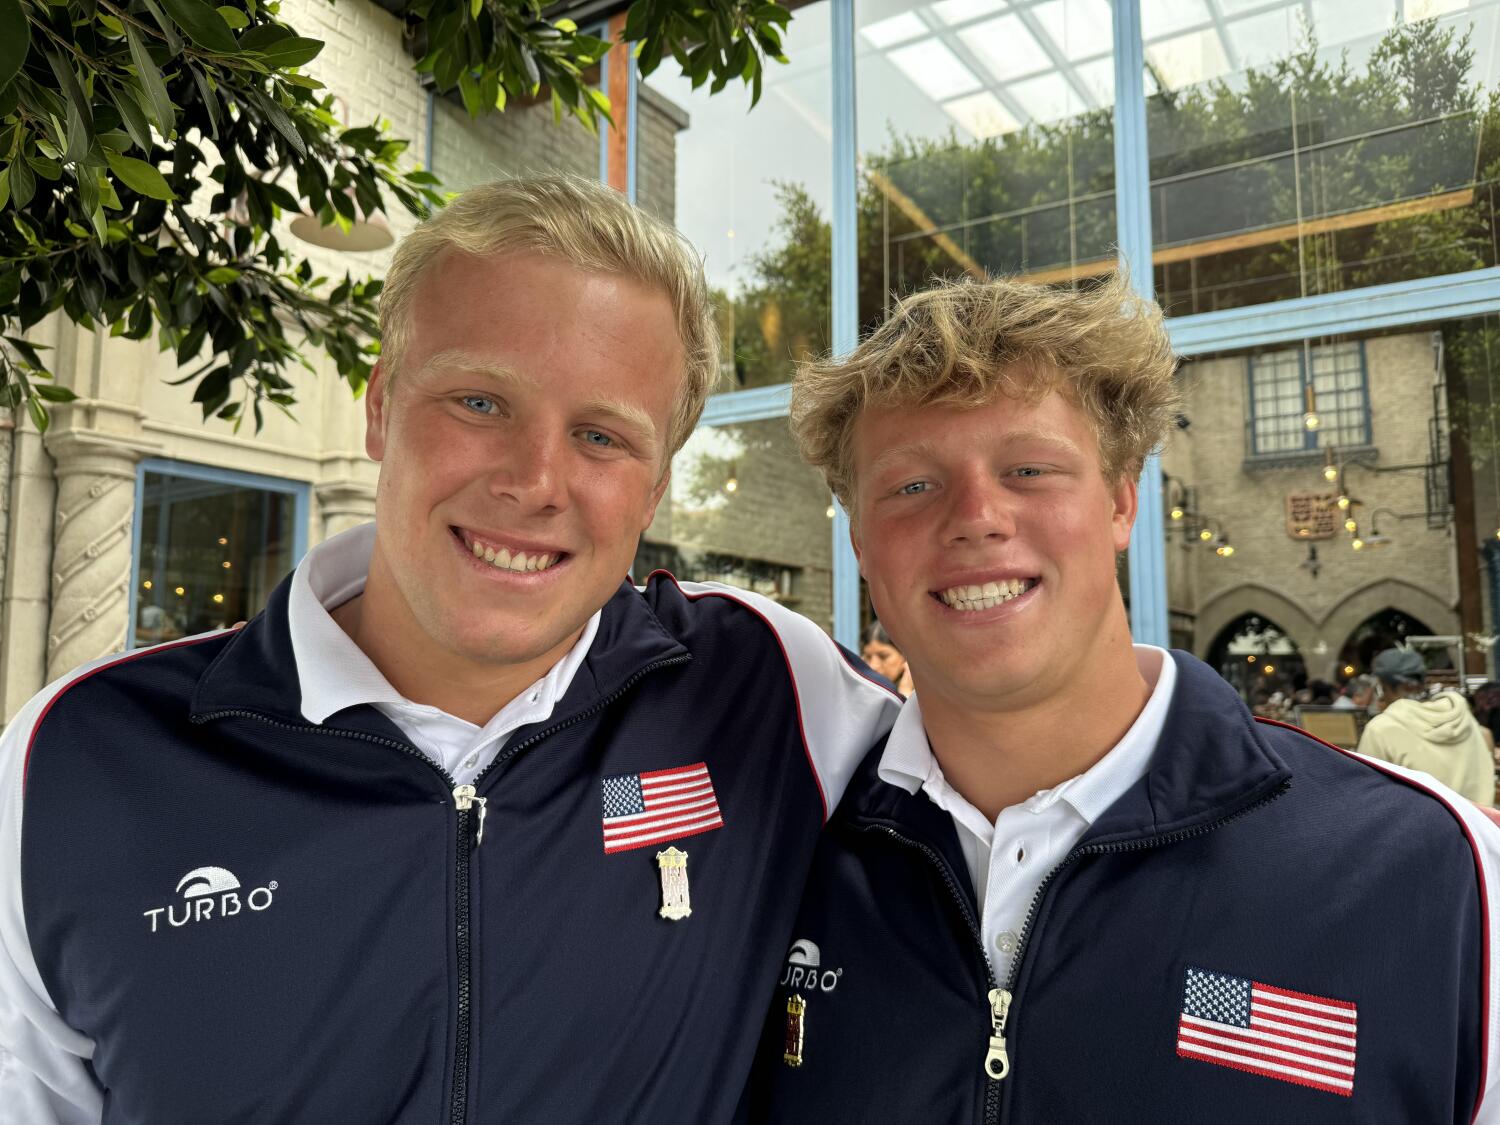 Dodd brothers, Ryder and Chase, selected to U.S. Olympic water polo team